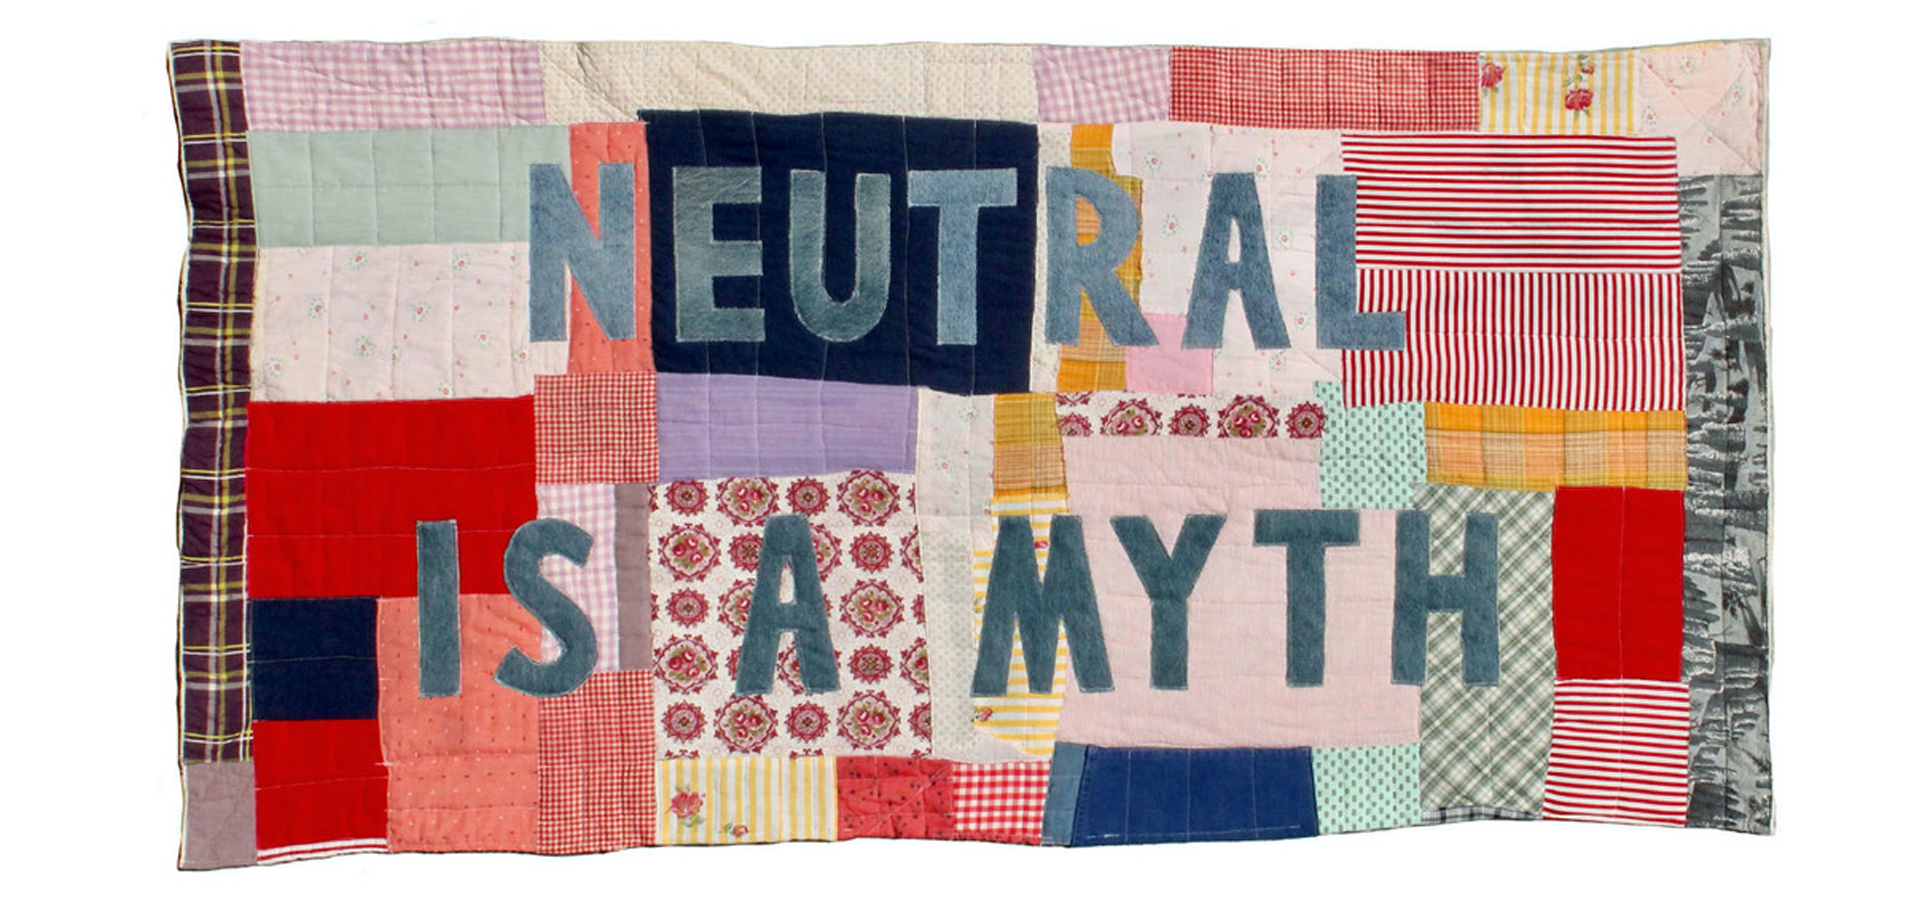 recycled textiles to make a quilt that says "Neutral is a Myth"